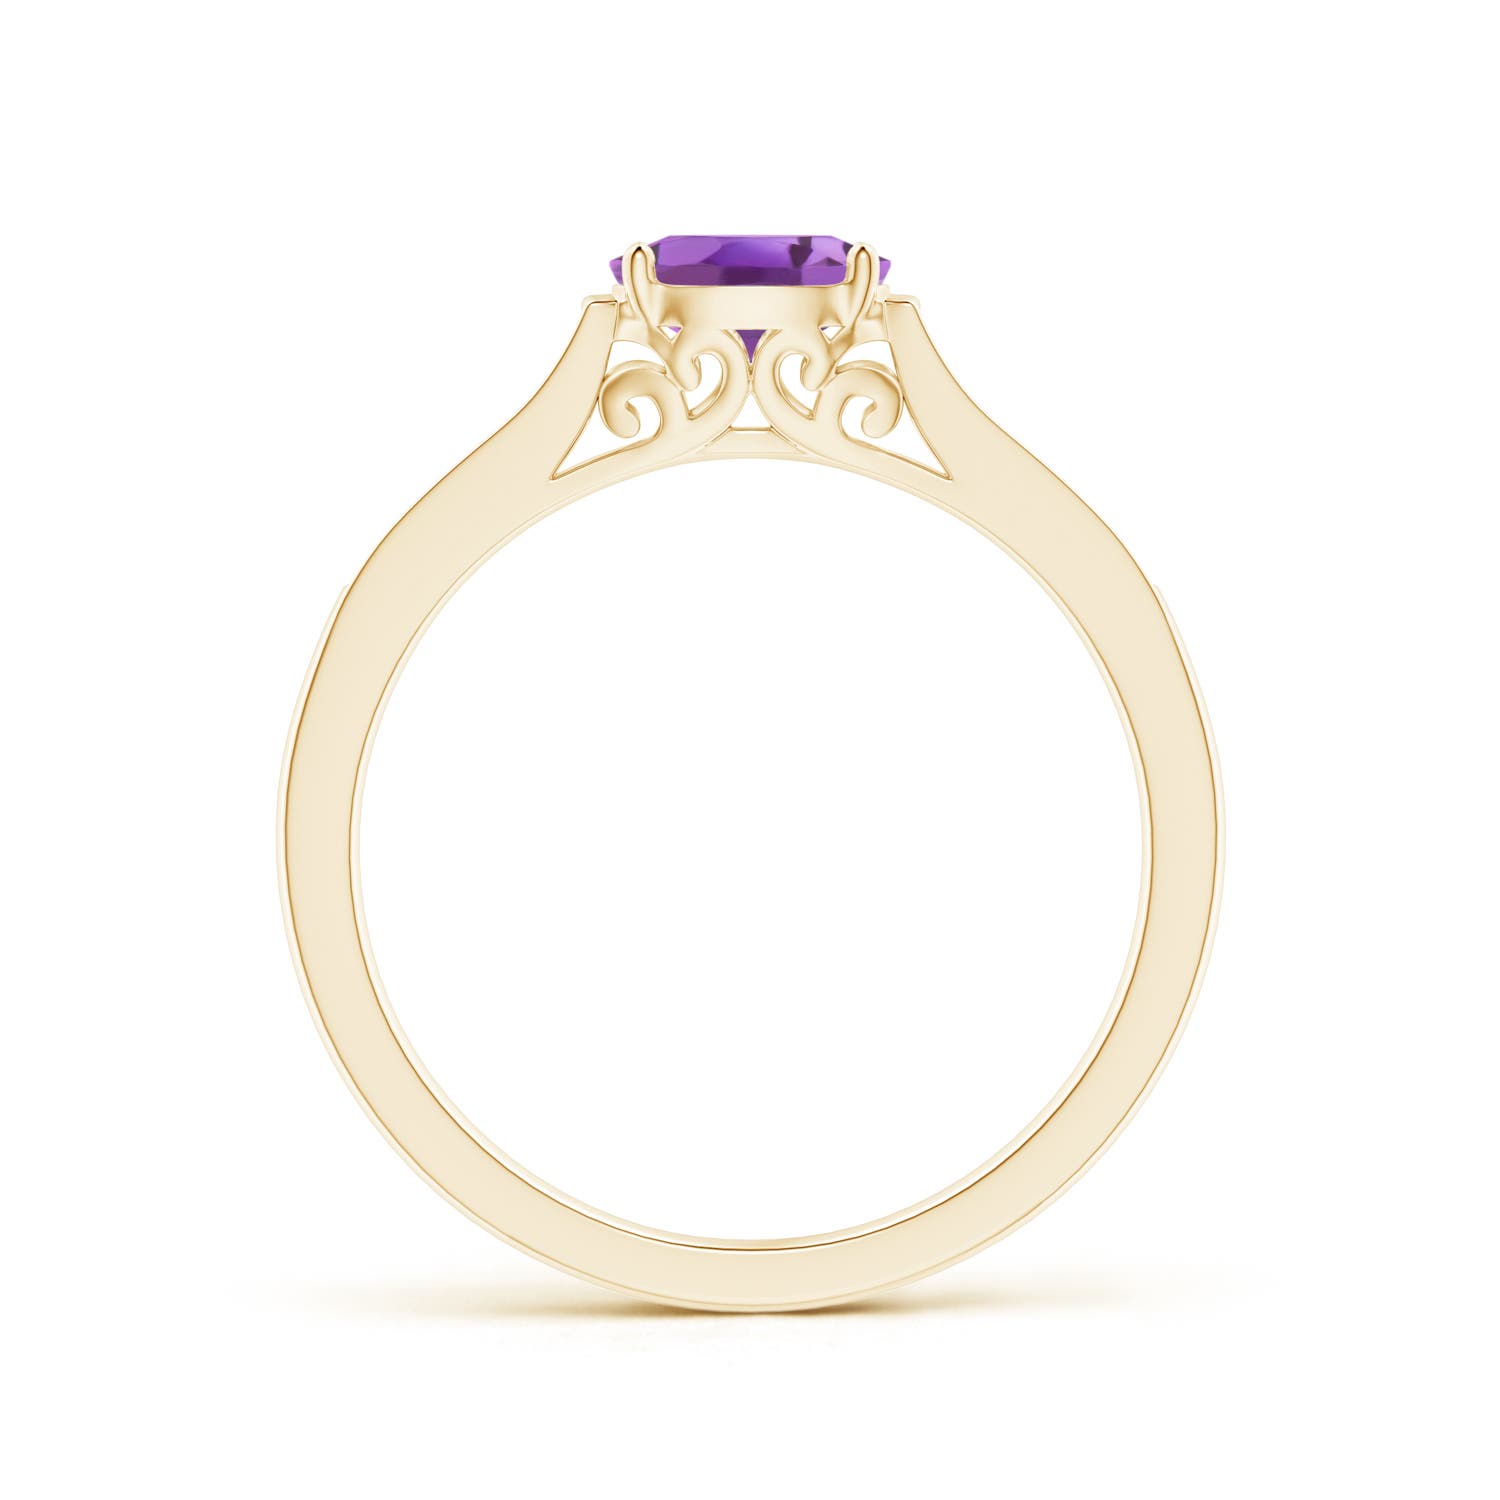 A - Amethyst / 0.5 CT / 14 KT Yellow Gold